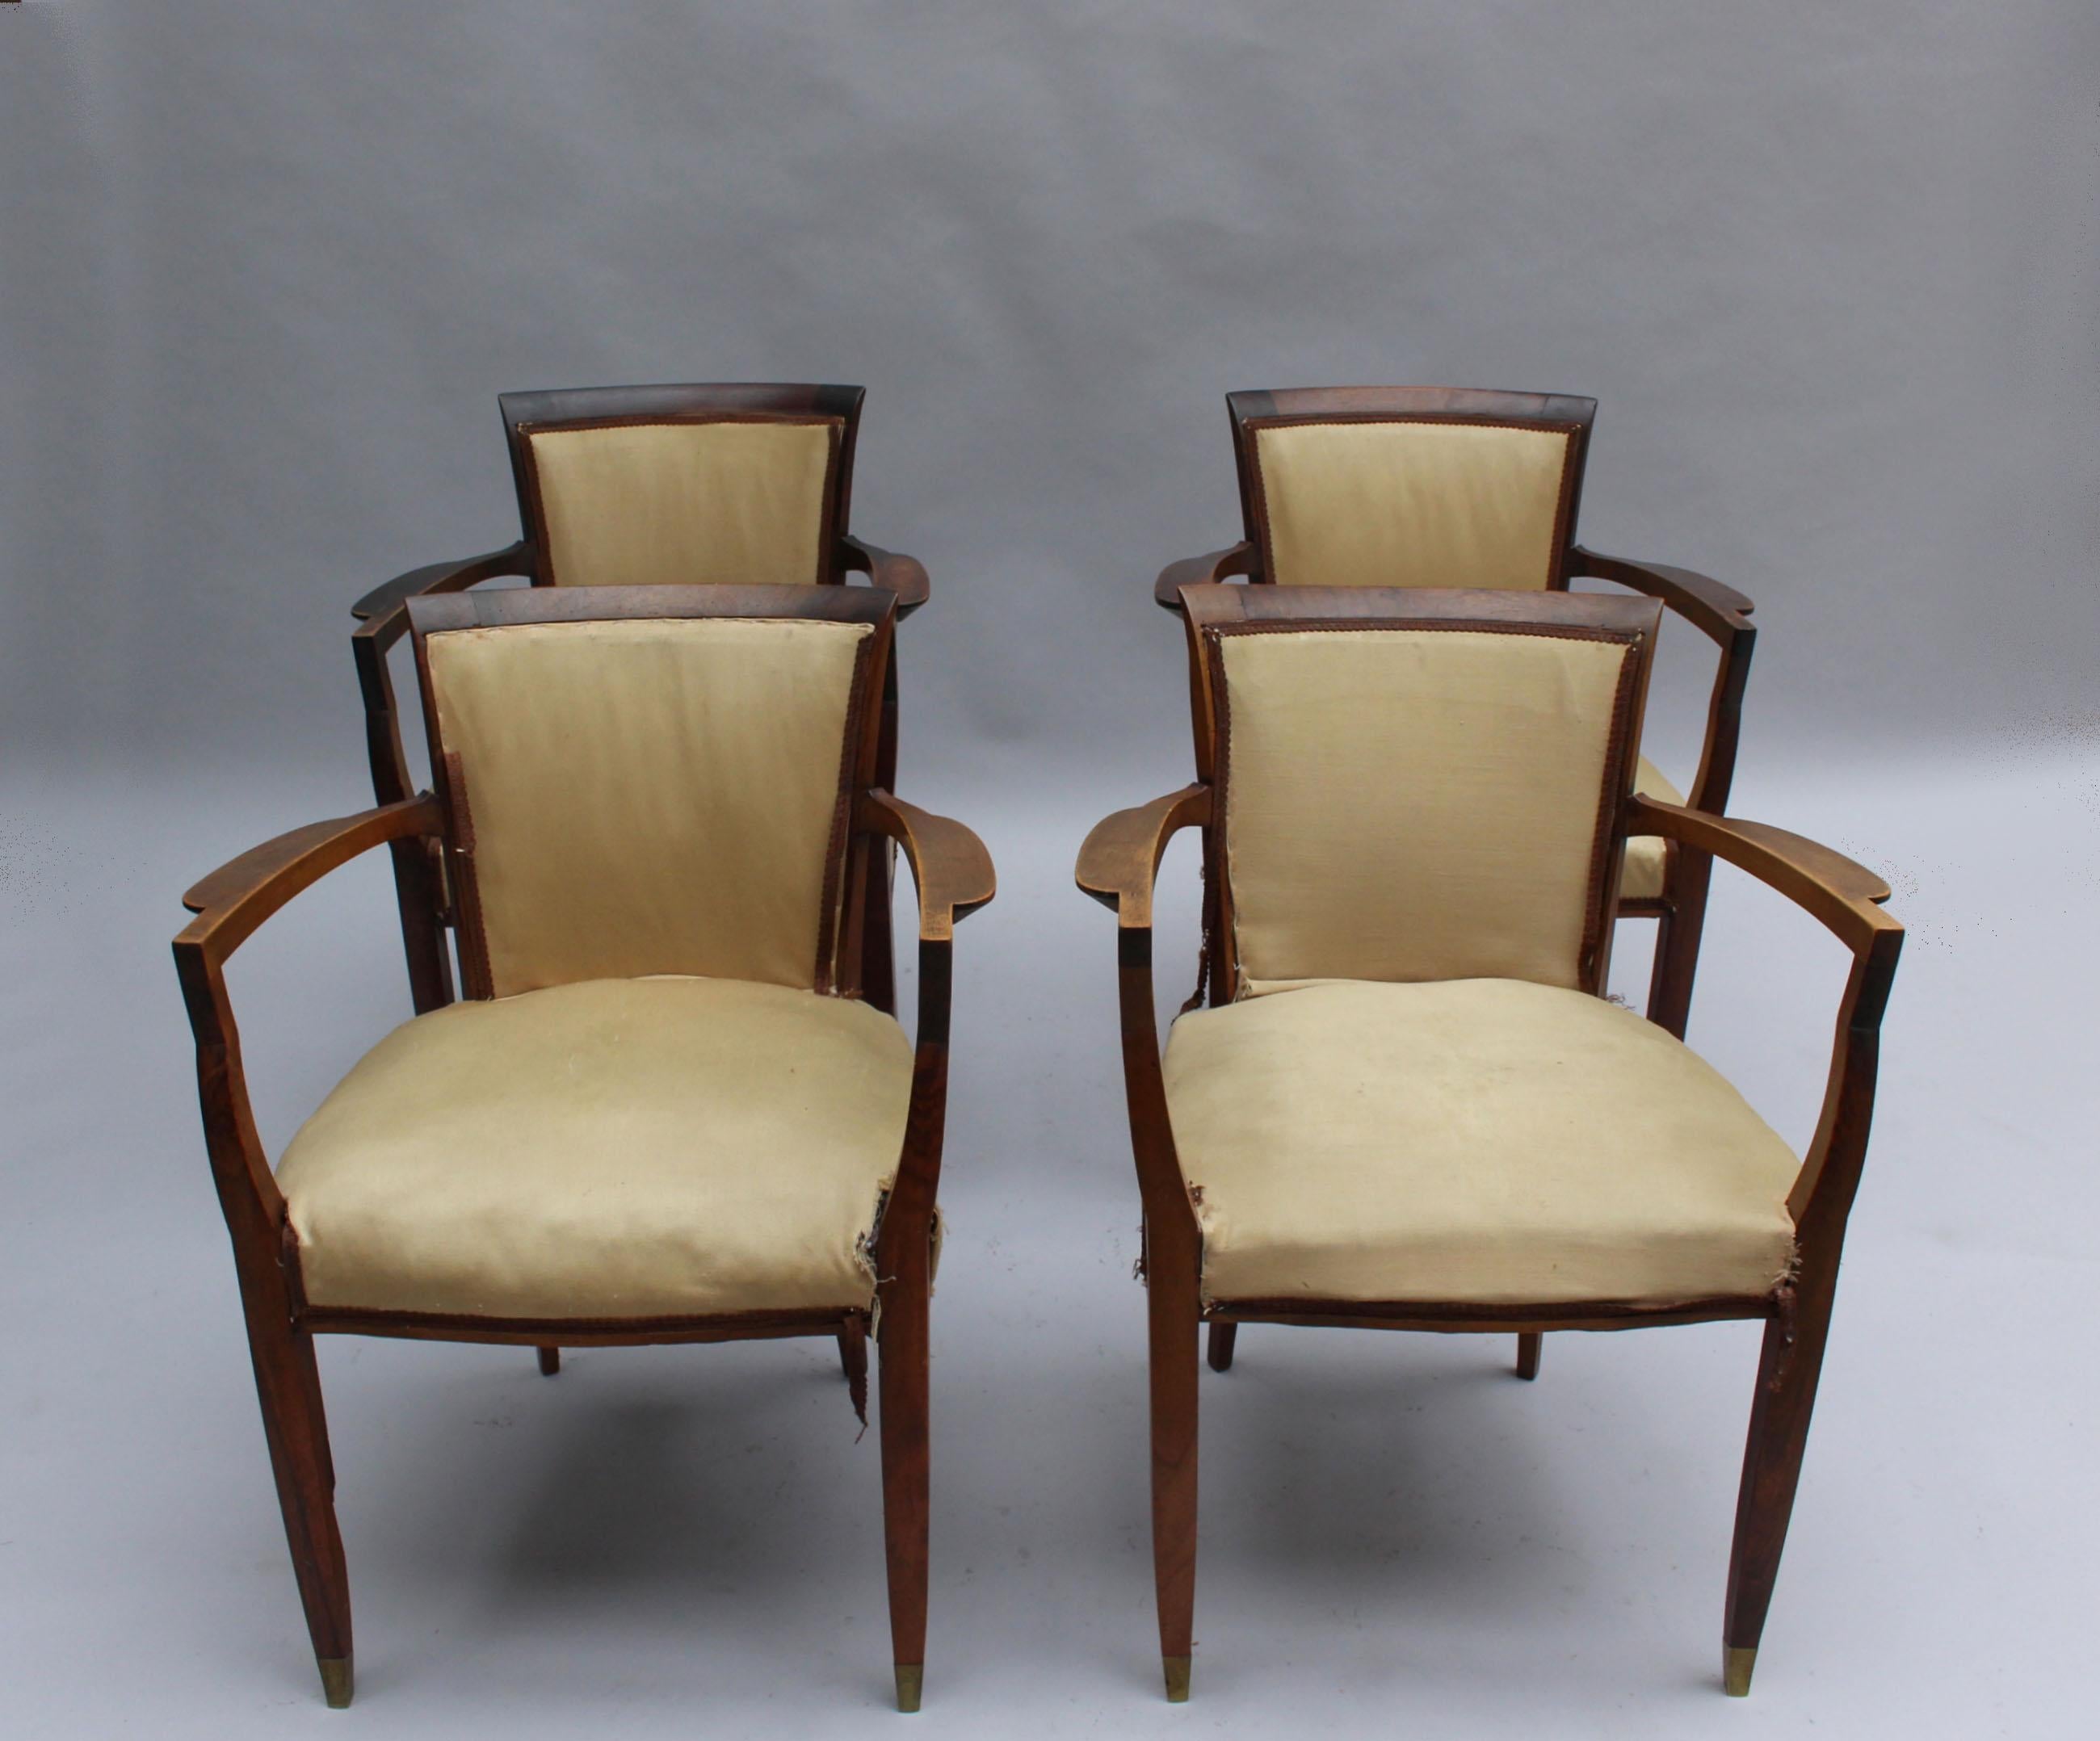 Four fine French Art Deco walnut bridge armchairs by Jules Leleu with bronze sabots.
Documented.
Price is per chair.